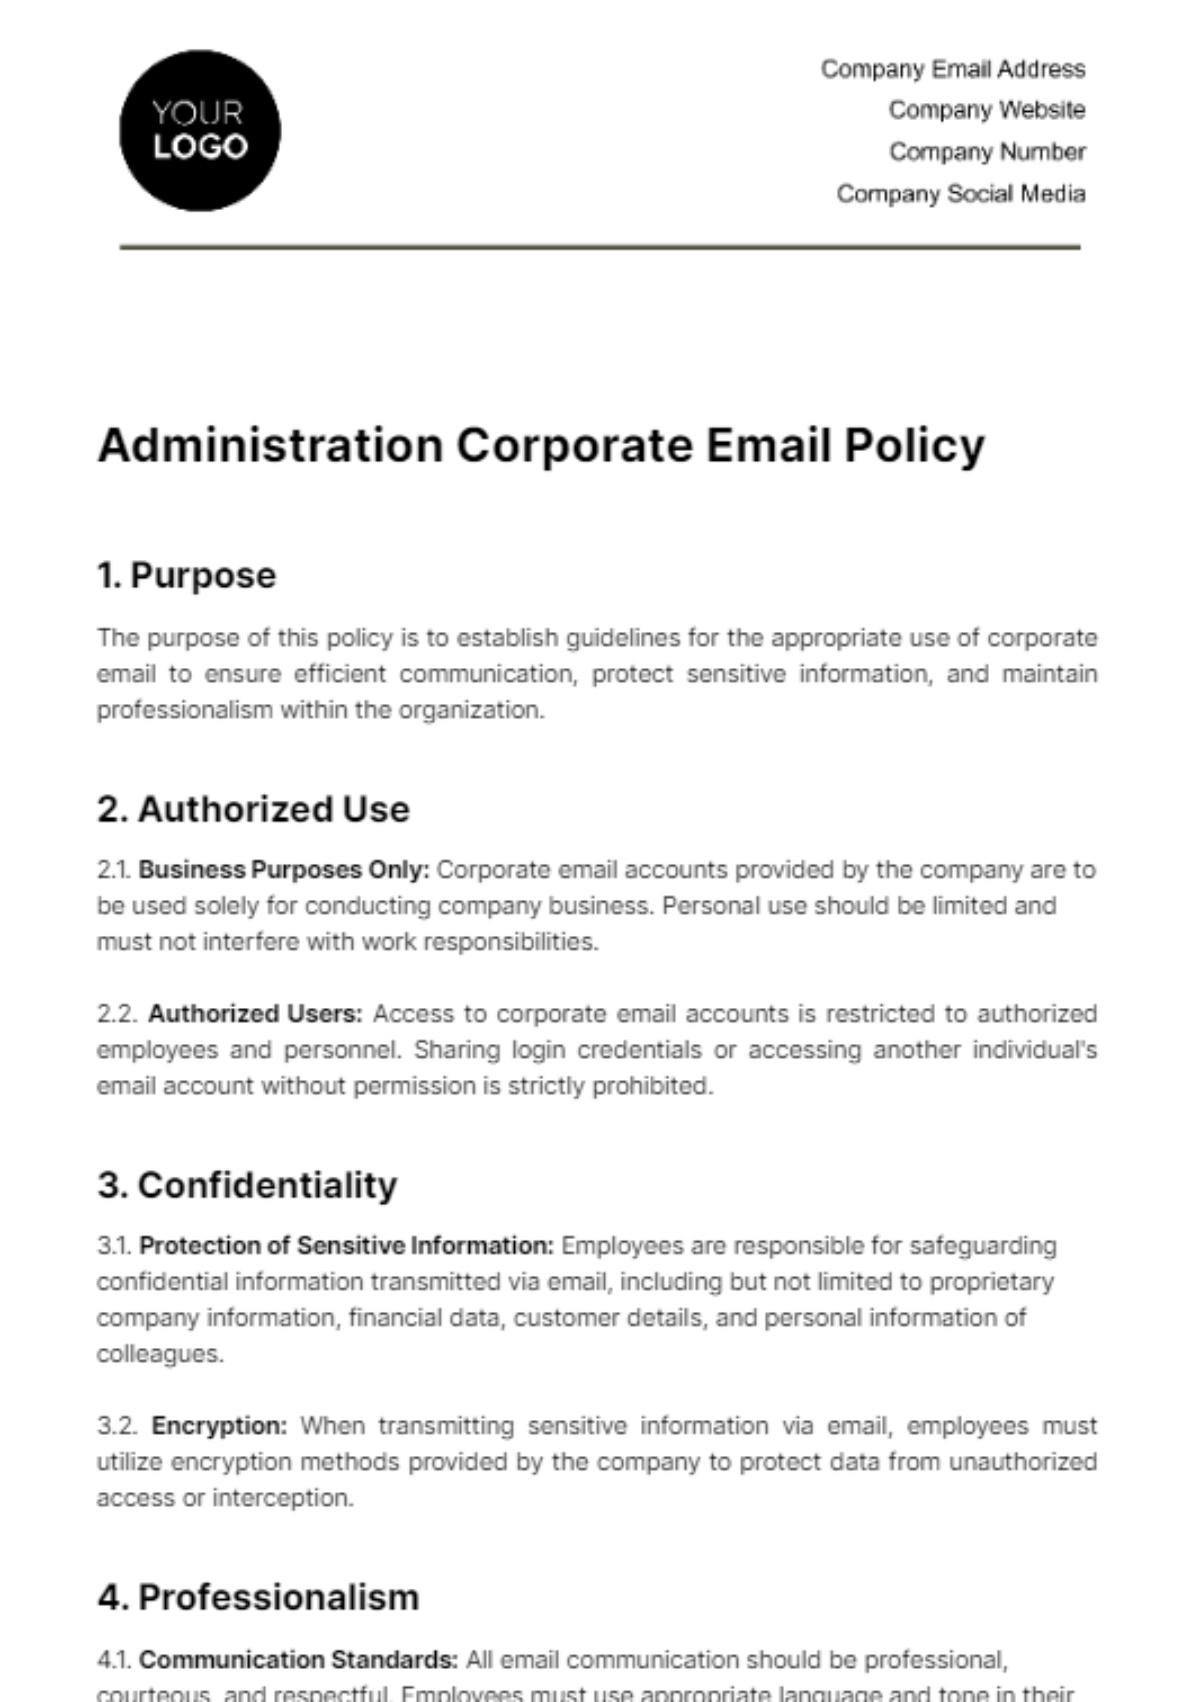 Administration Corporate Email Policy Template